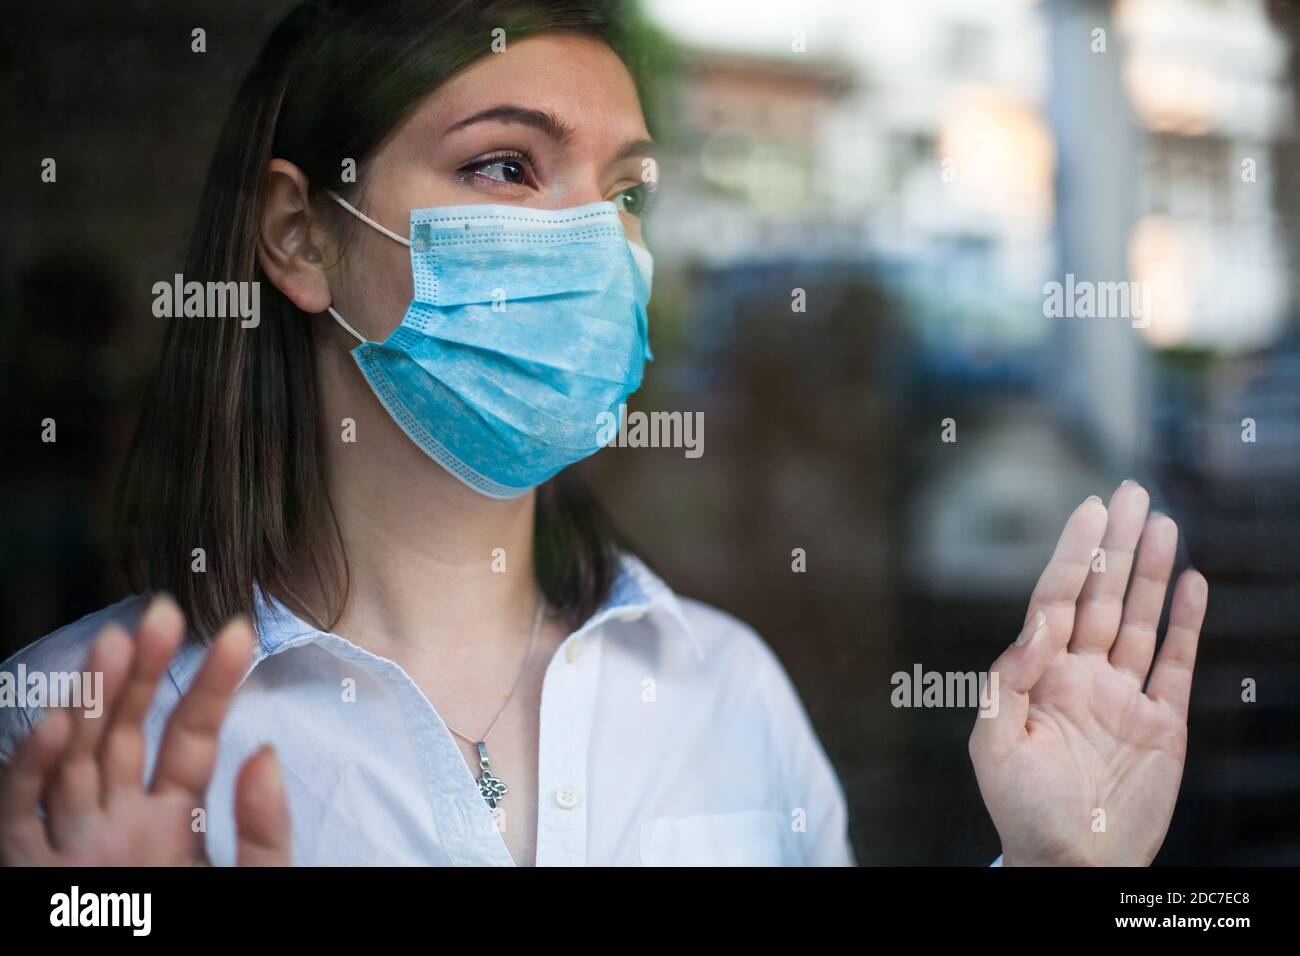 Beautiful young woman wearing face mask,looking through window outside,hands against glass,Coronavirus COVID-19 global pandemic crisis,stay at home Stock Photo